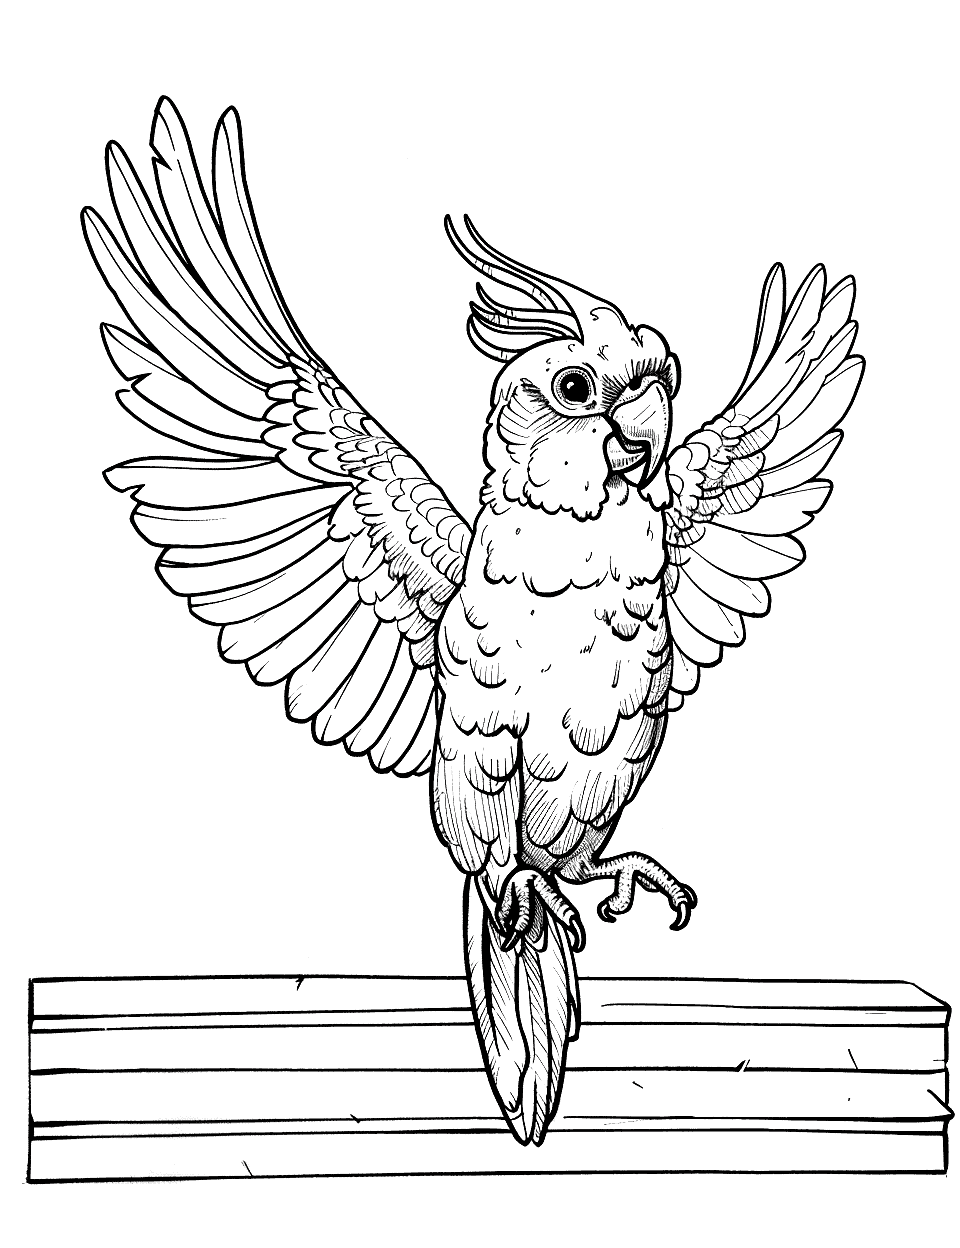 Cockatoo Dancing Parrot Coloring Page - A playful cockatoo dancing on a plain wooden floor with its wings spread.